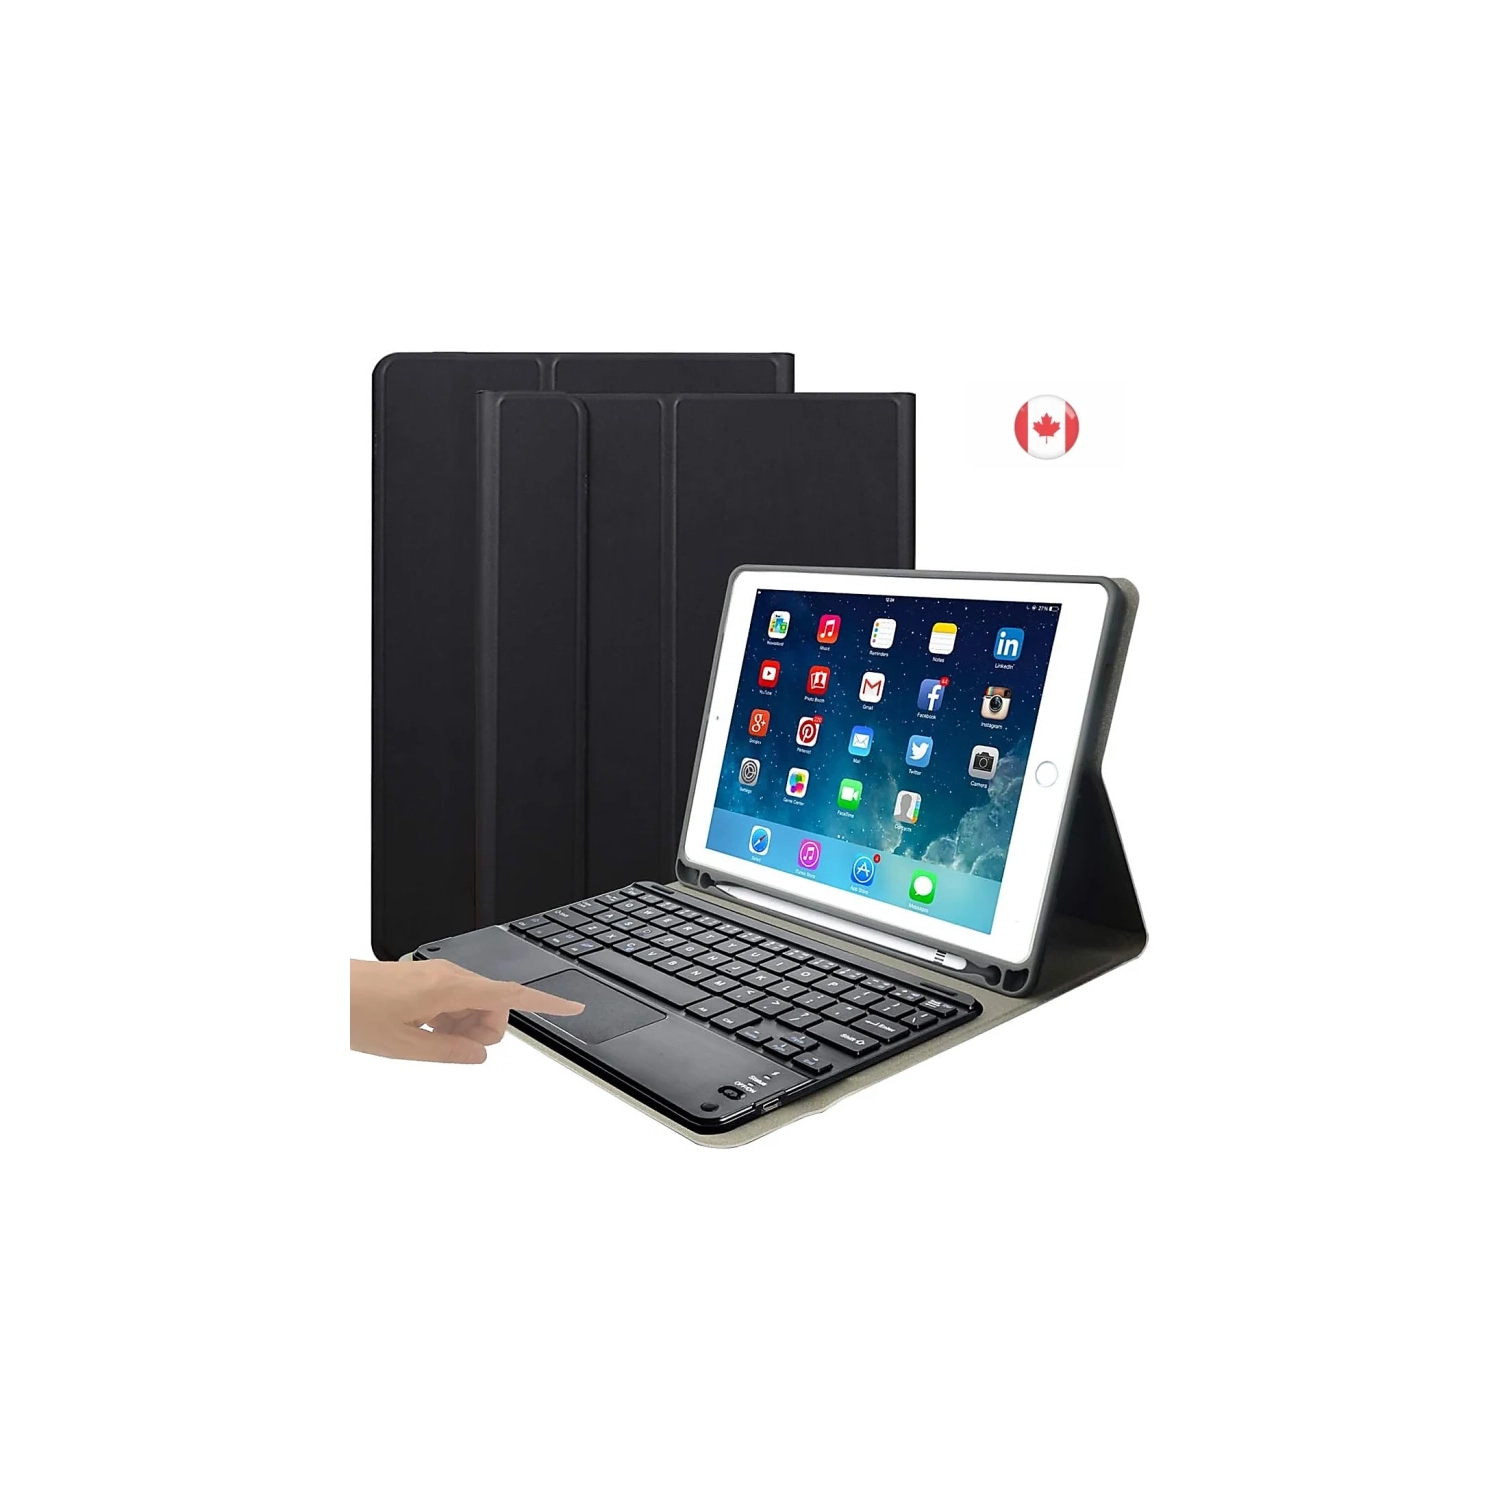 Black iPad Mini 4/5 Keyboard Case - Built-in Touchpad, Pencil Holder - iPad Cover with Keyboard